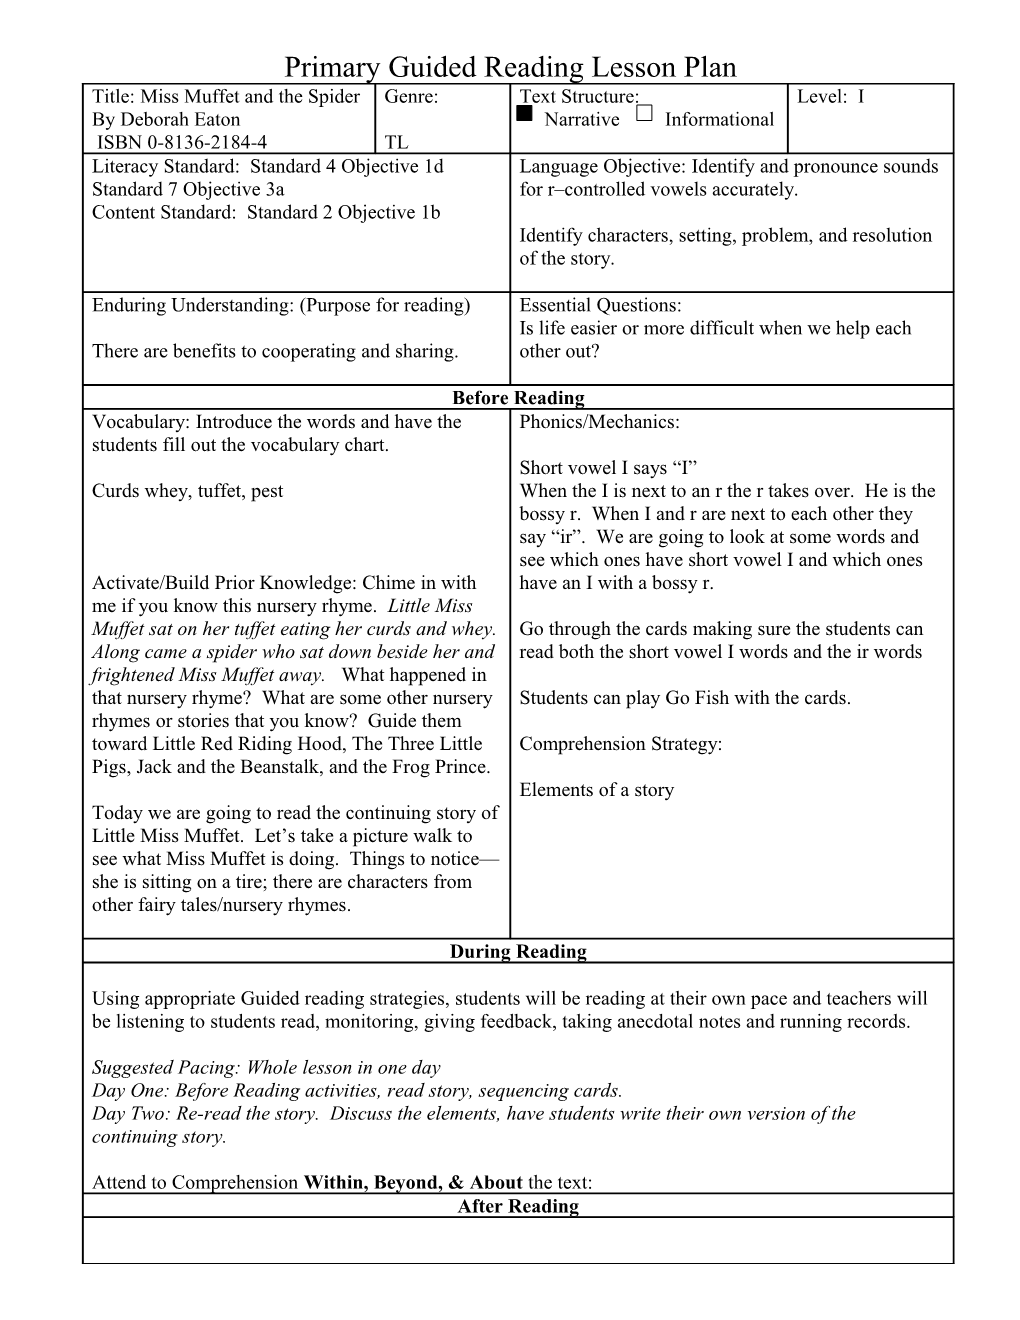 Primary Guided Reading Lesson Plan s7